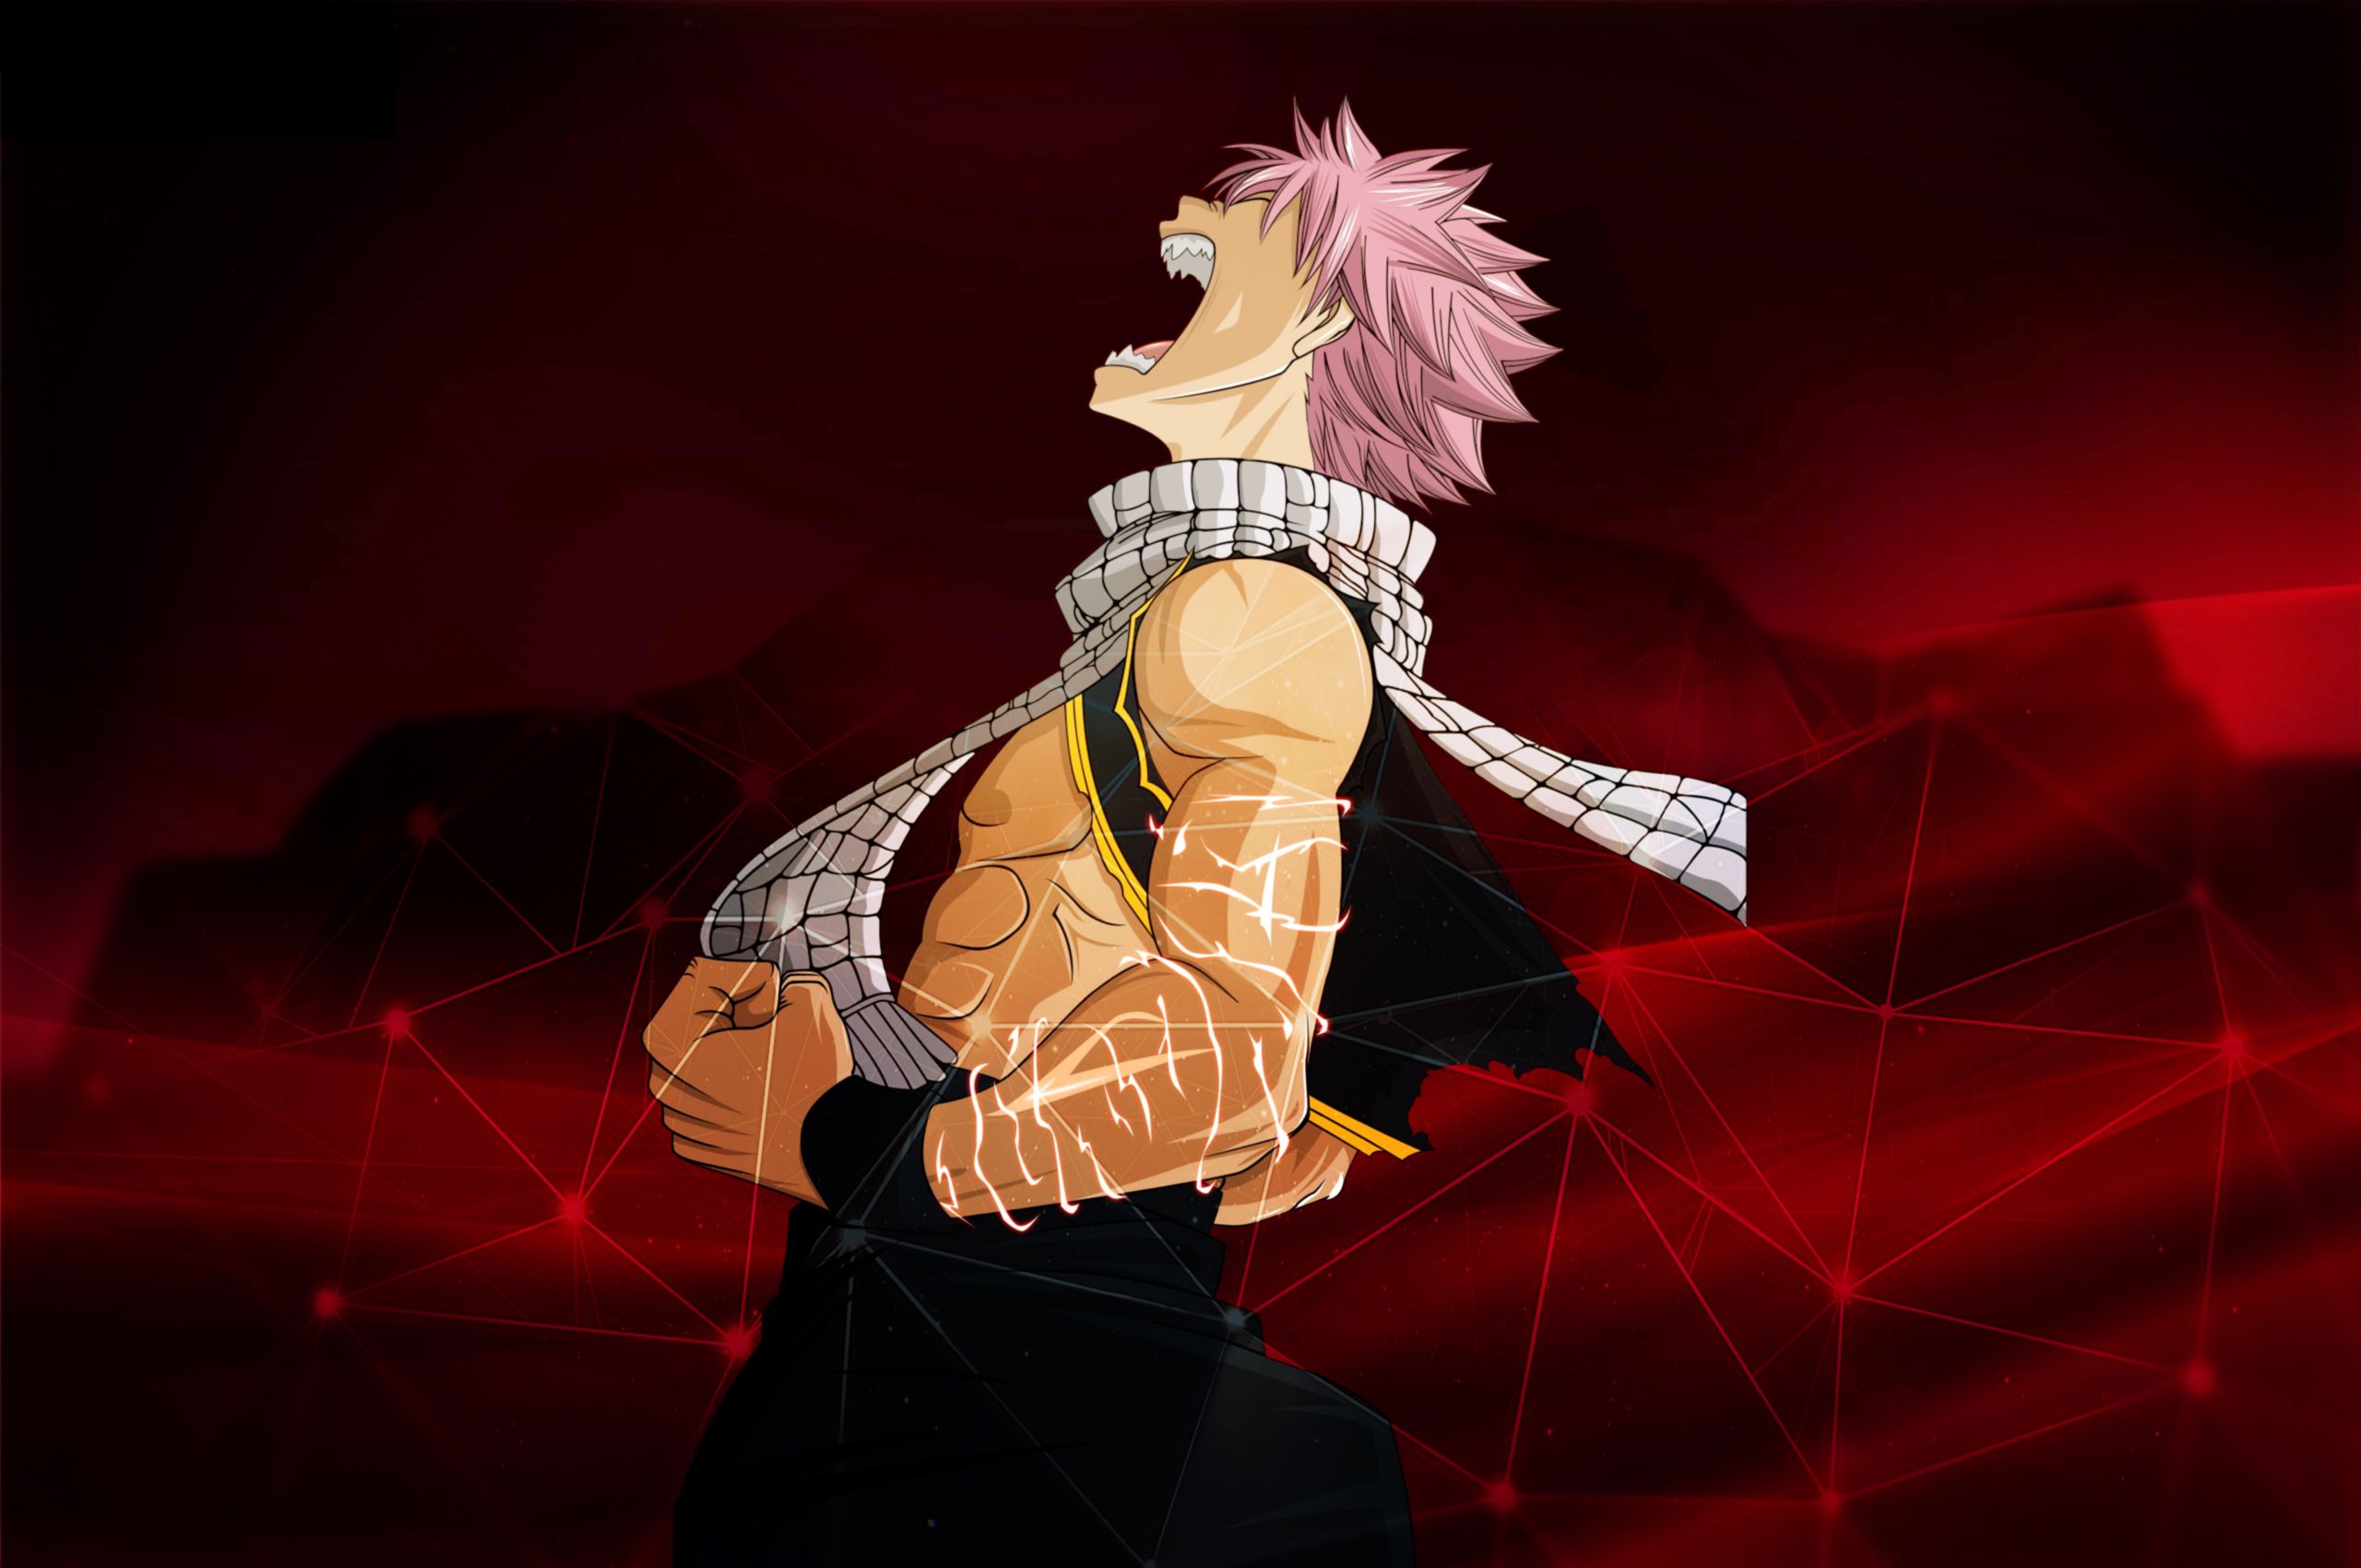 Natsu Dragneel Fairy Tail Chromebook Pixel Wallpaper, HD Anime 4K Wallpaper, Image, Photo and Background